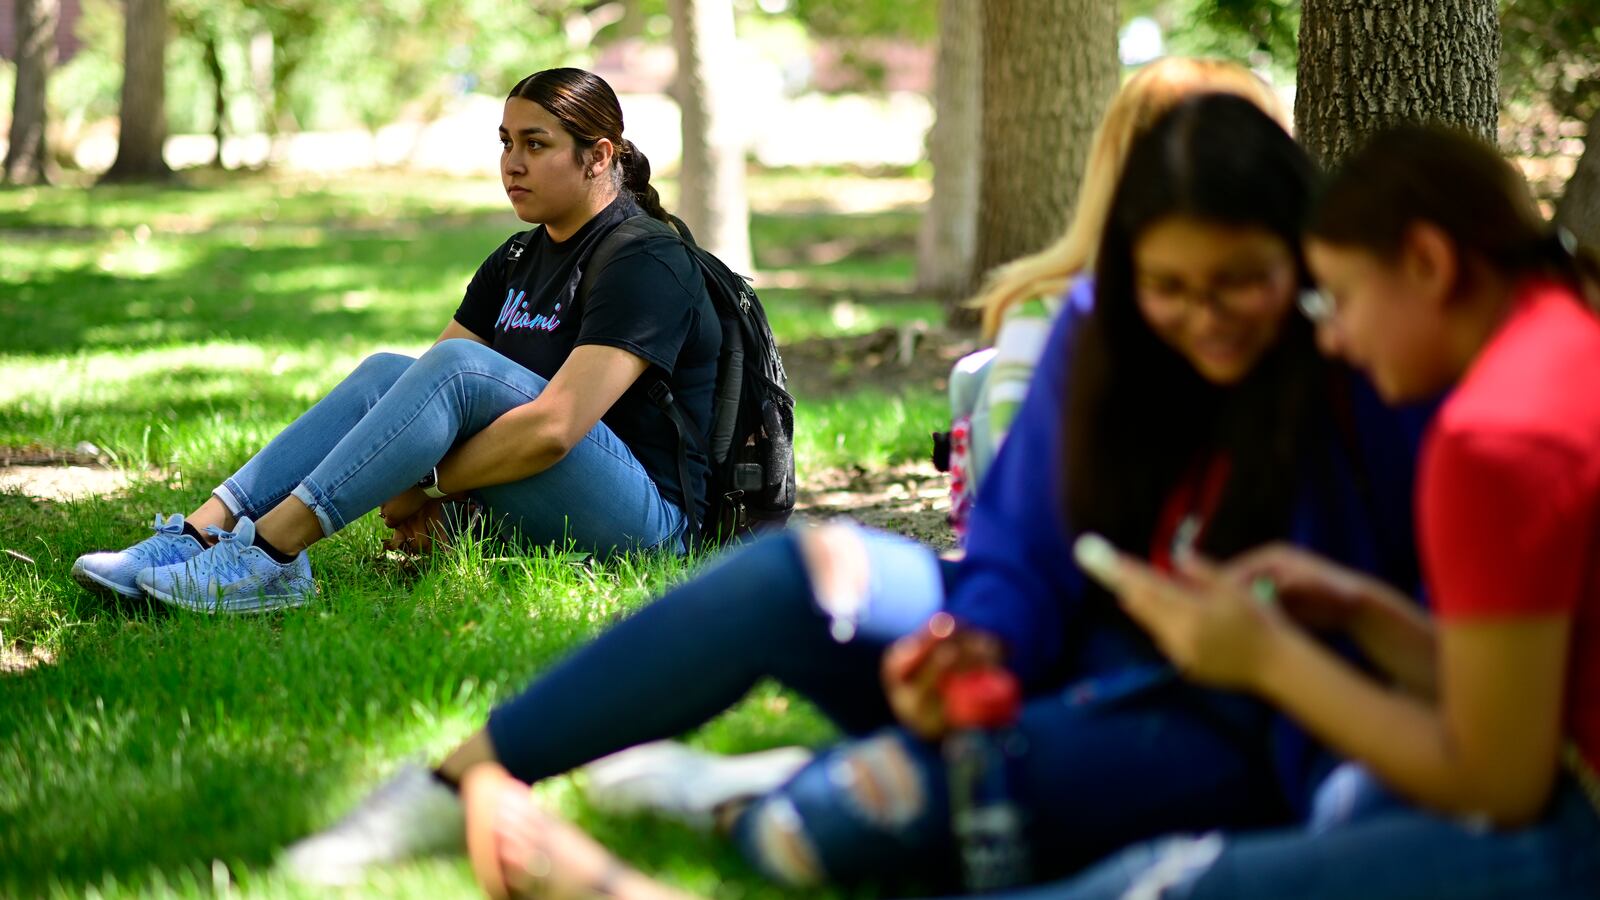 A young woman sits on the grass next to a tree, while other students speak with one another in the foreground.